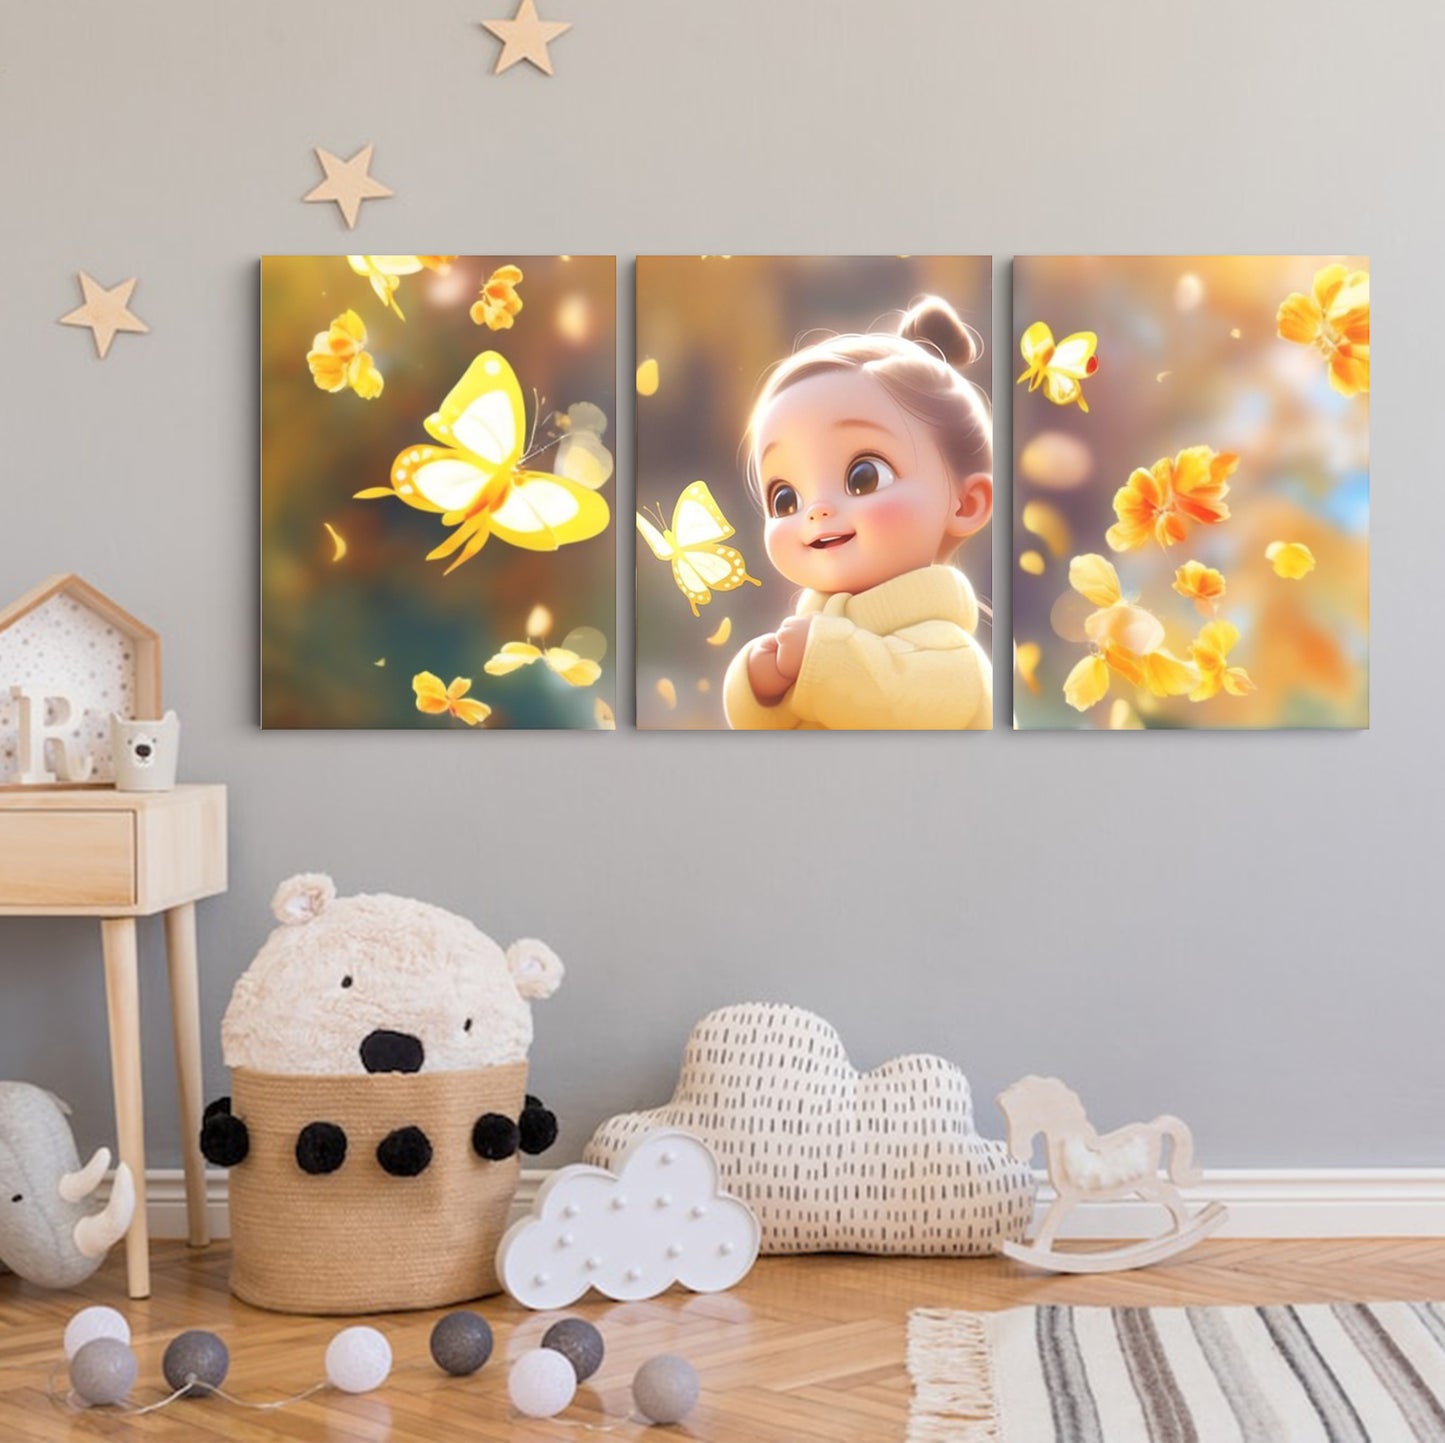 Butterfly Dreams: A Wall Art Embracing the Delightful Harmony of a Cute Baby Girl and Fluttering Butterflies - Celebrate the Whimsy of Youth and Nature's Grace - S05E72